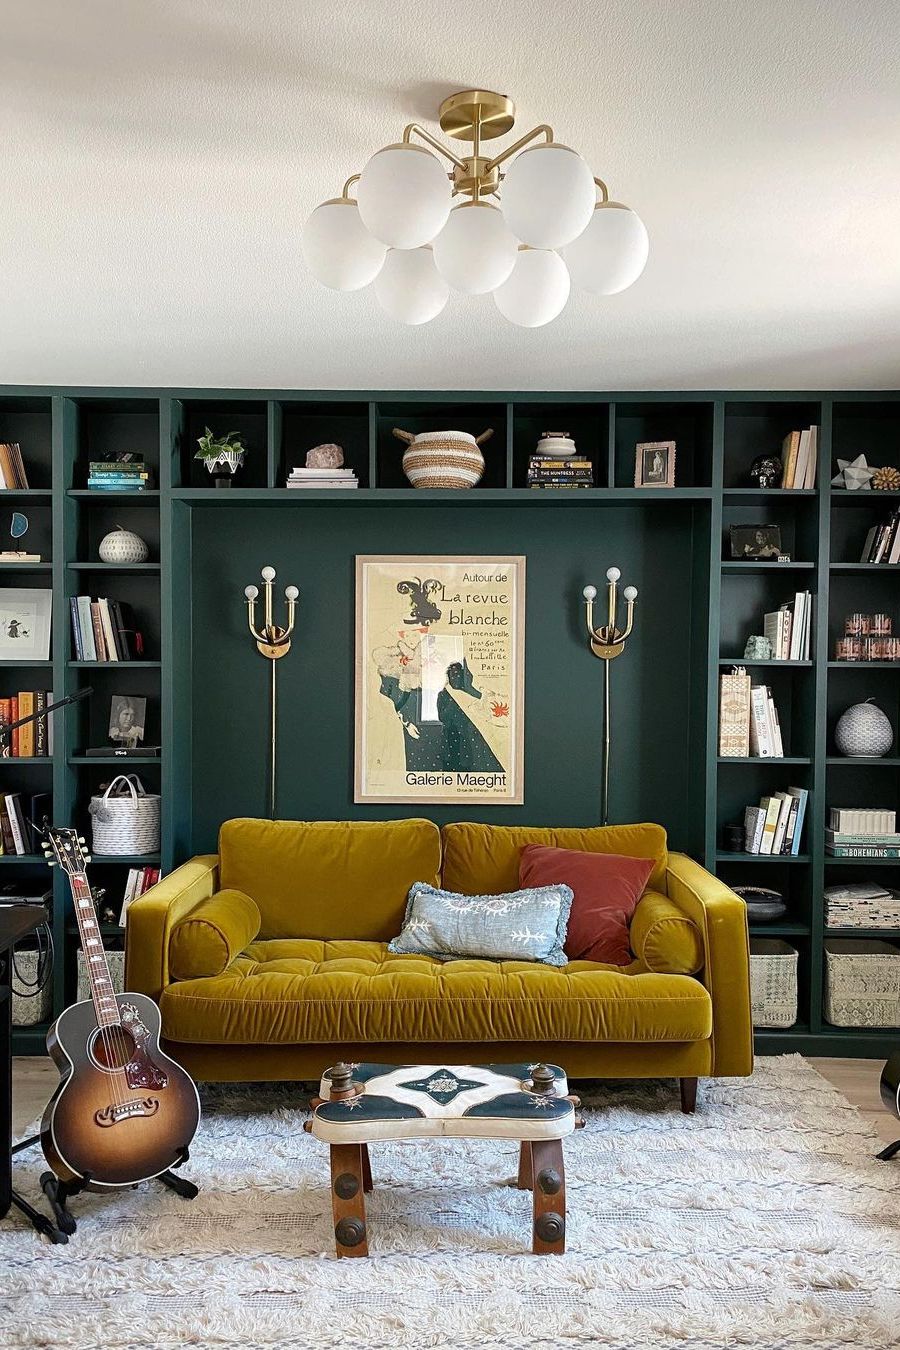 Room with sofa and shelves with books